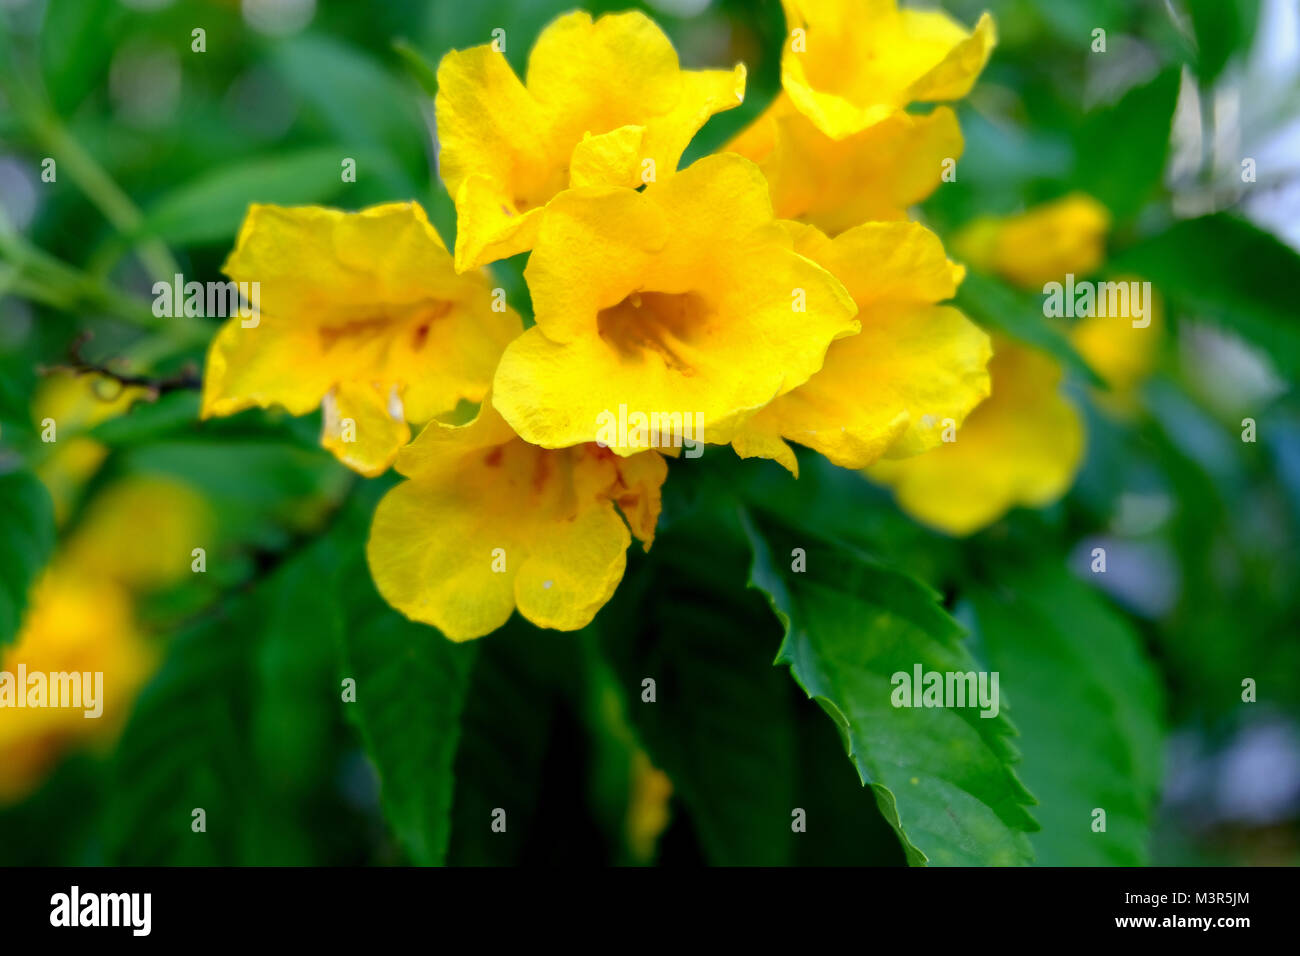 Yellow elder, Trumpetbush, Trumpetflower, Scientific name isTecoma stans, flower bloom with yellow color and green leaf. Stock Photo